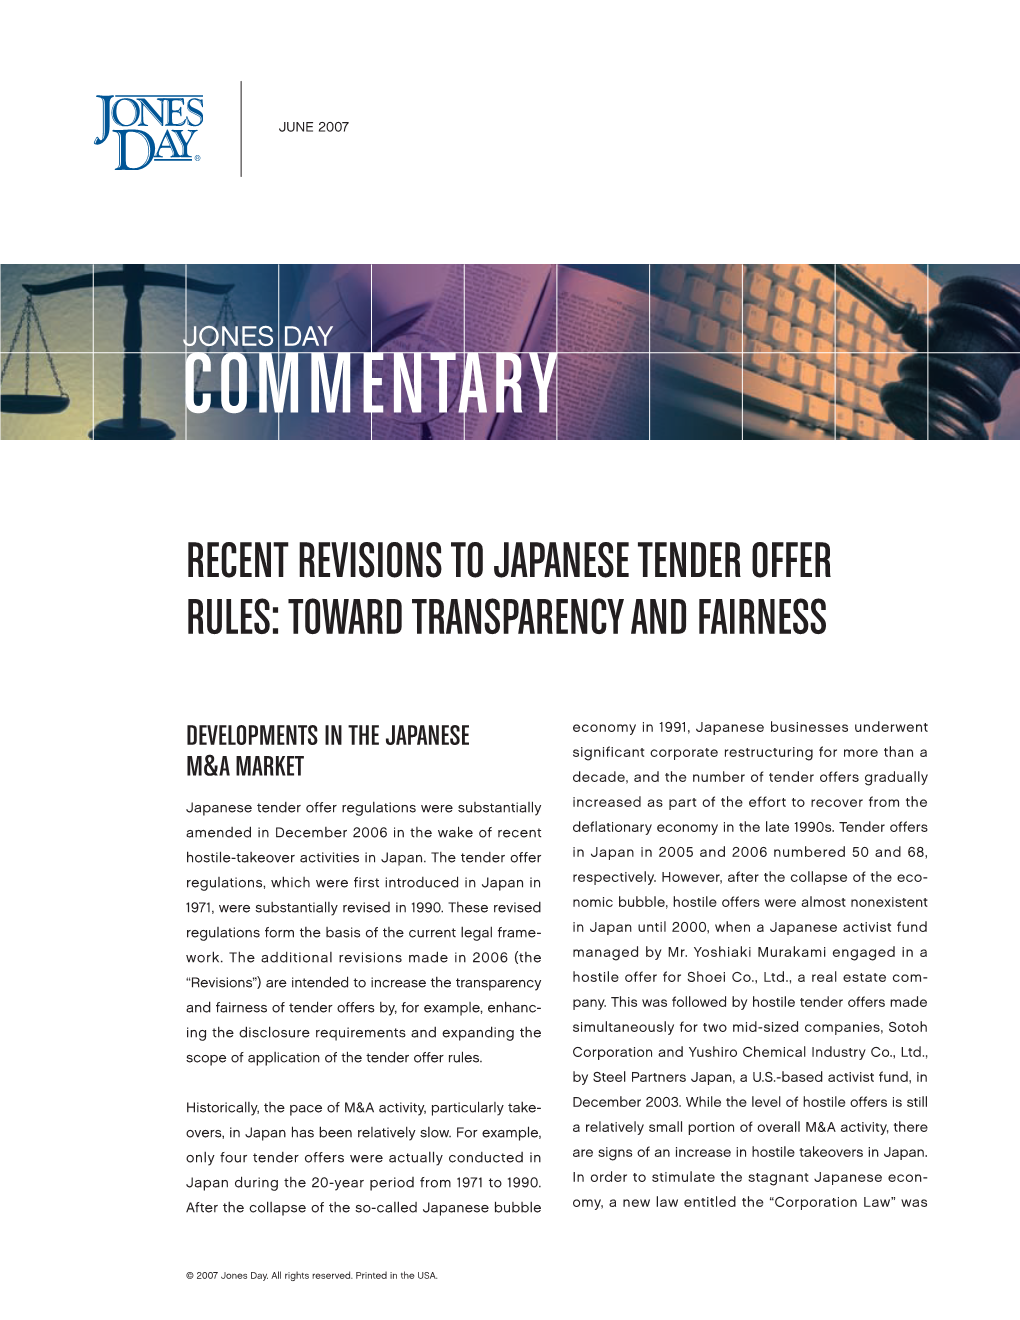 Recent Revisions to Japanese Tender Offer Rules: Toward Transparency and Fairness